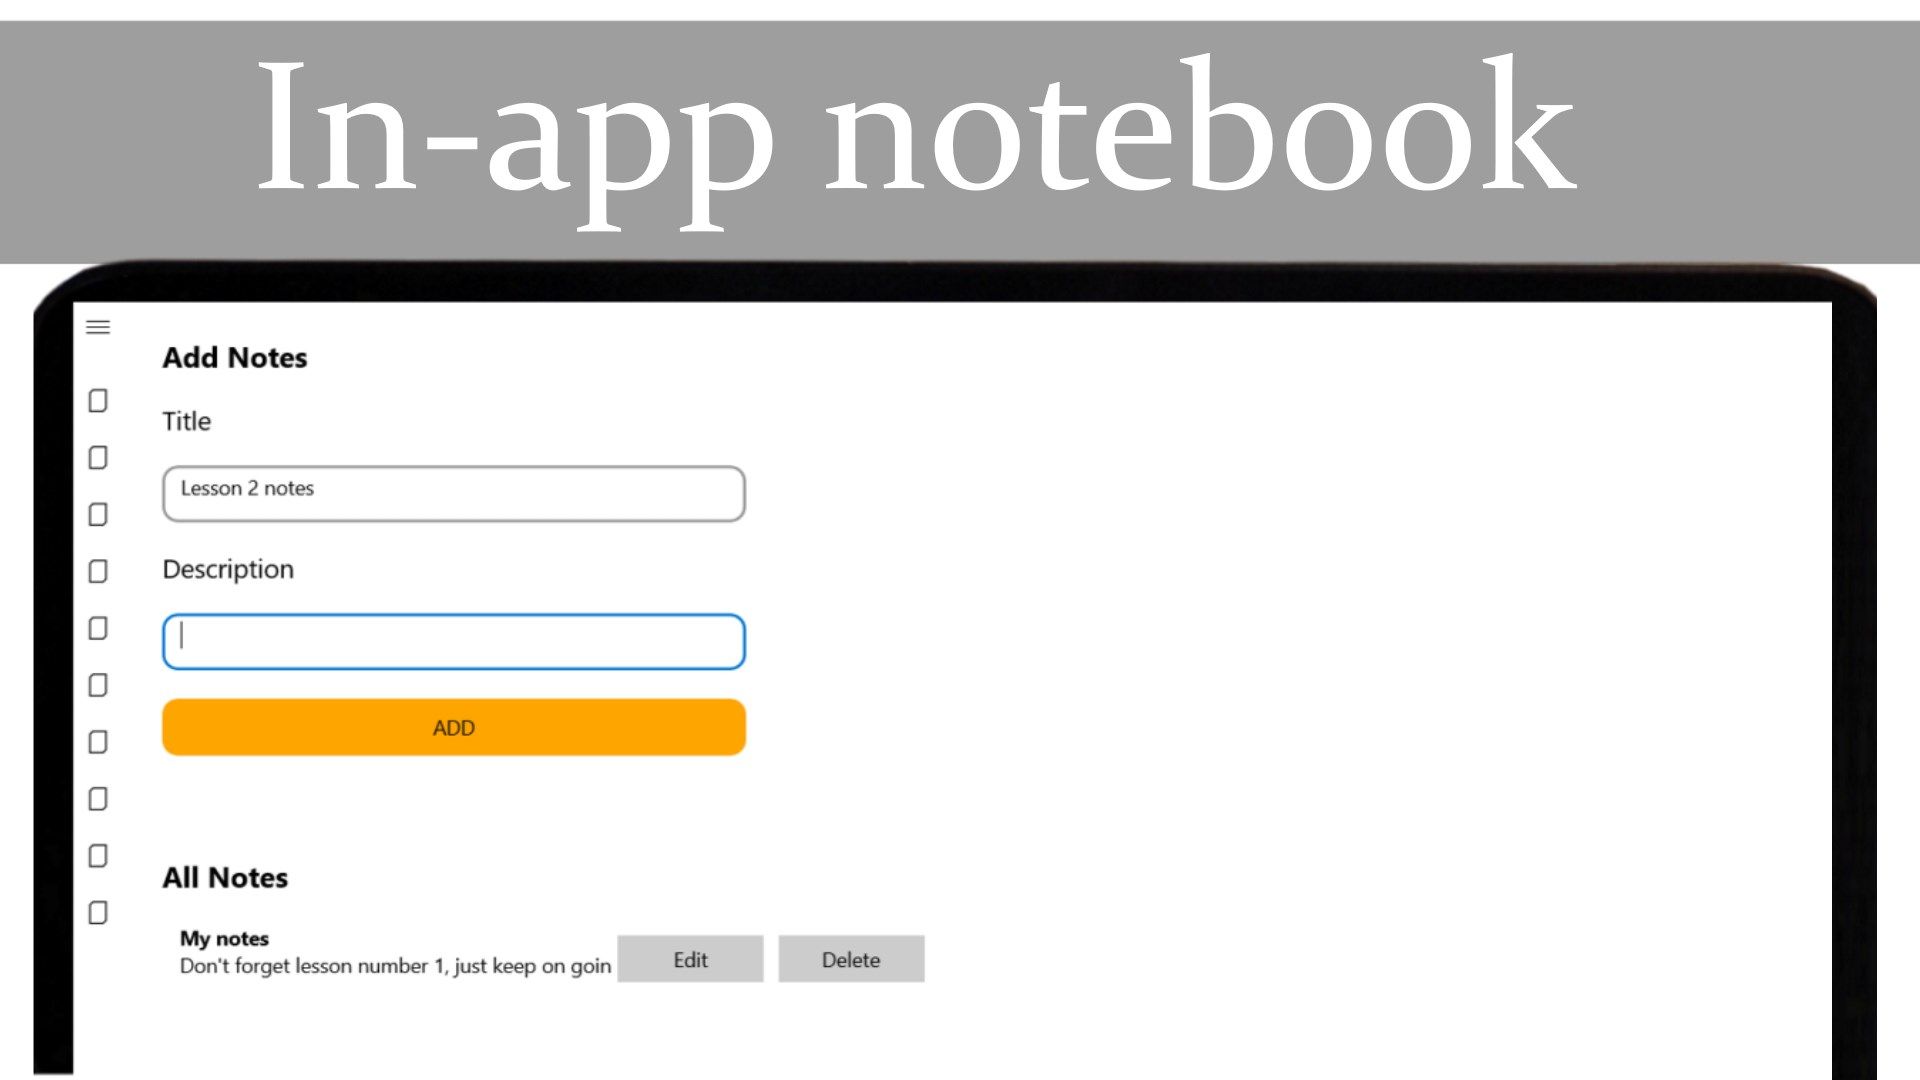 In app notes system - Write your notes, insights, and practice.